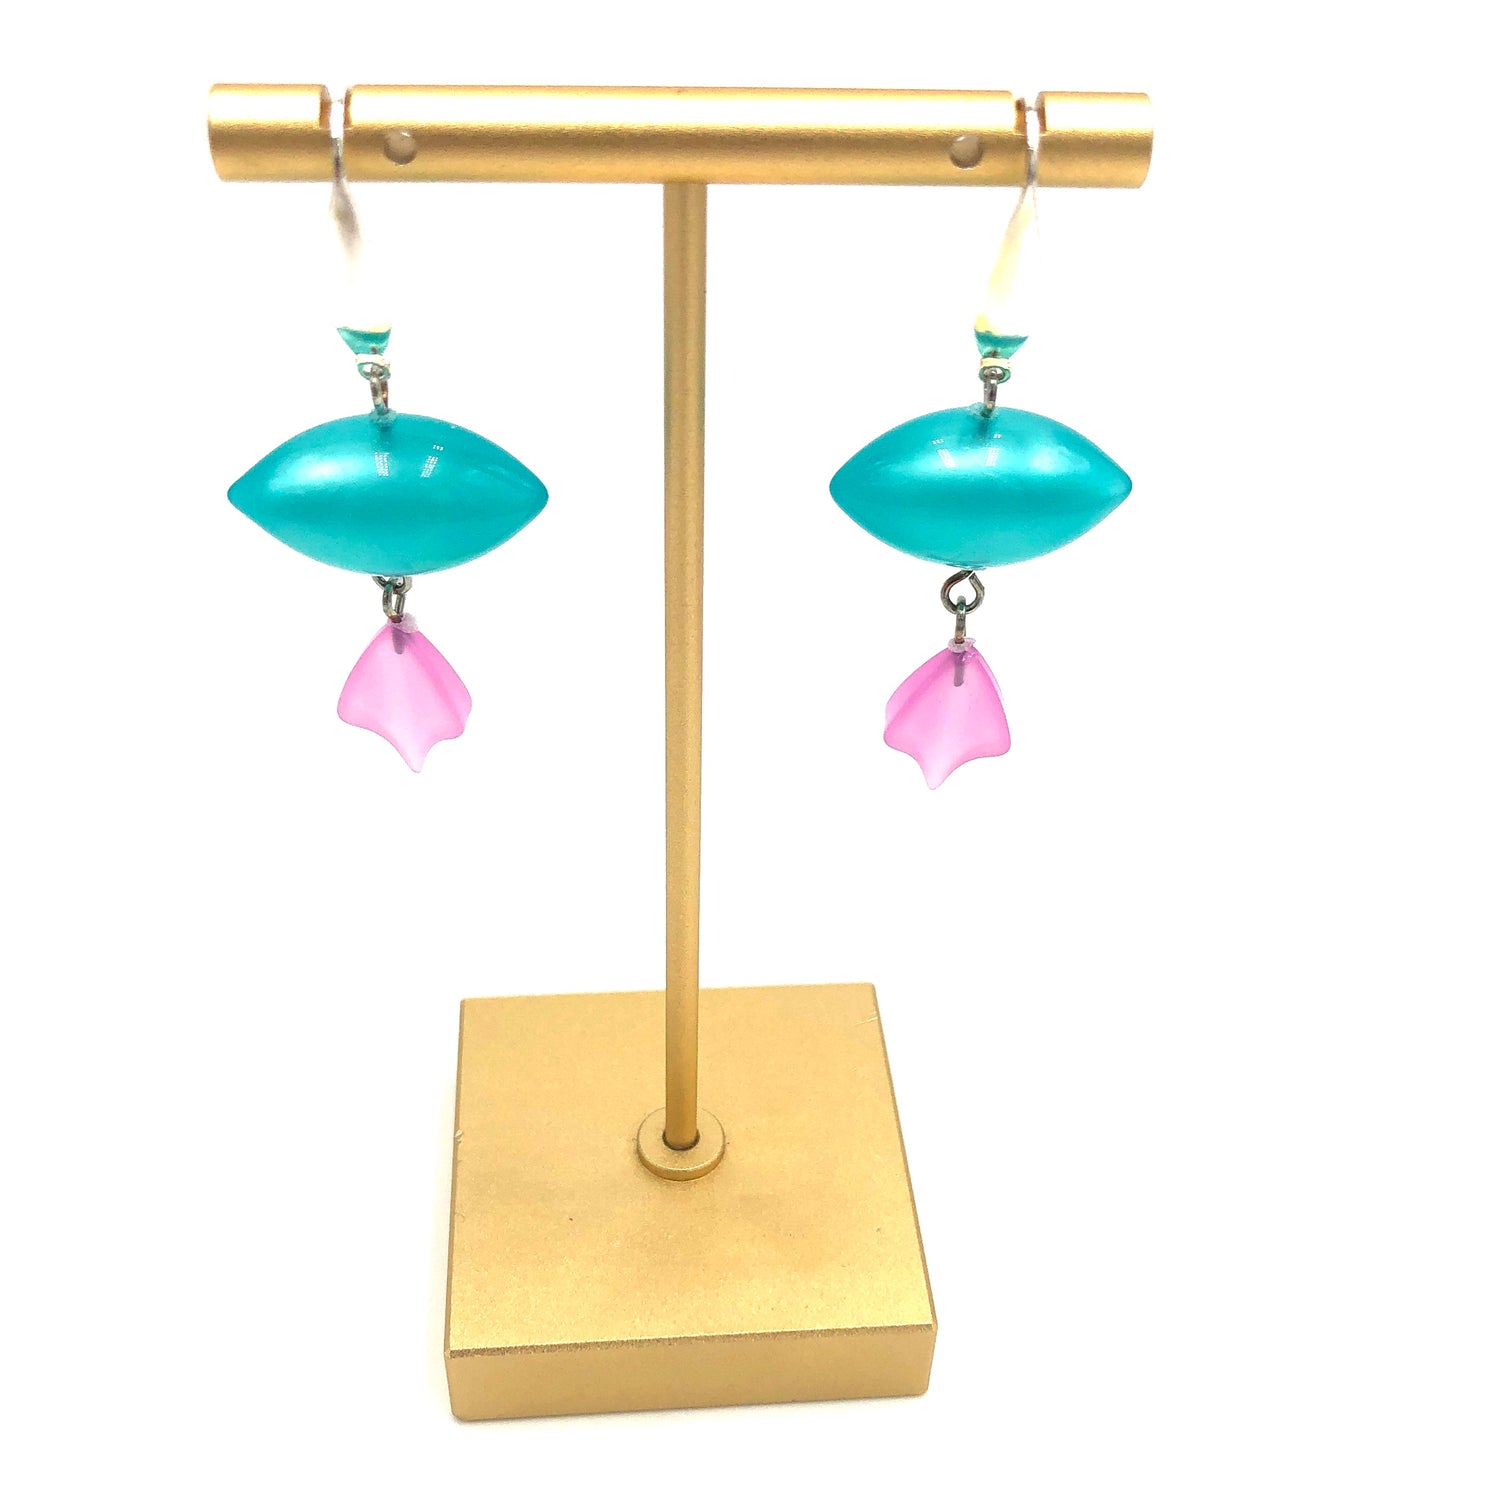 Teal Pod &amp; Lilac Moonglow Statement Earrings